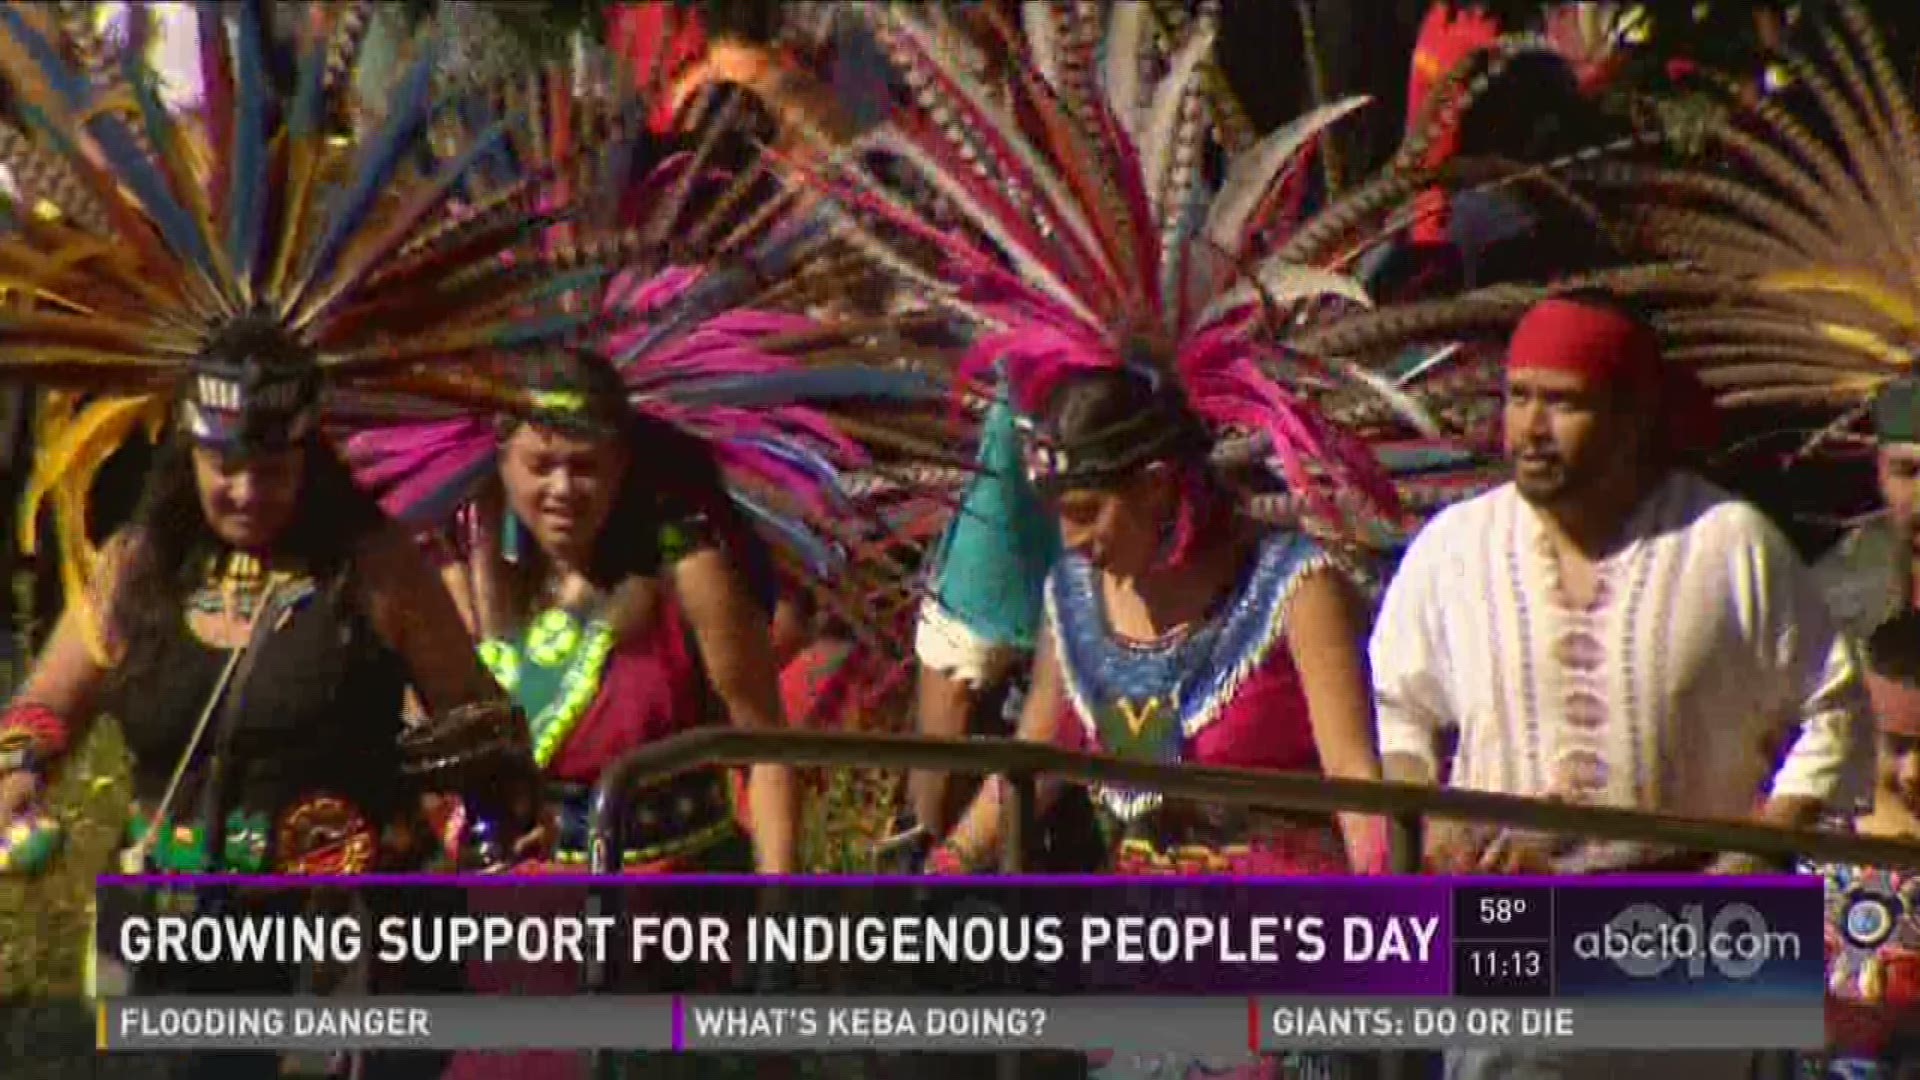 Today is Columbus Day, but several communities are doing away with the holiday in favor of Indigenous People's Day. (Oct. 10, 2016)